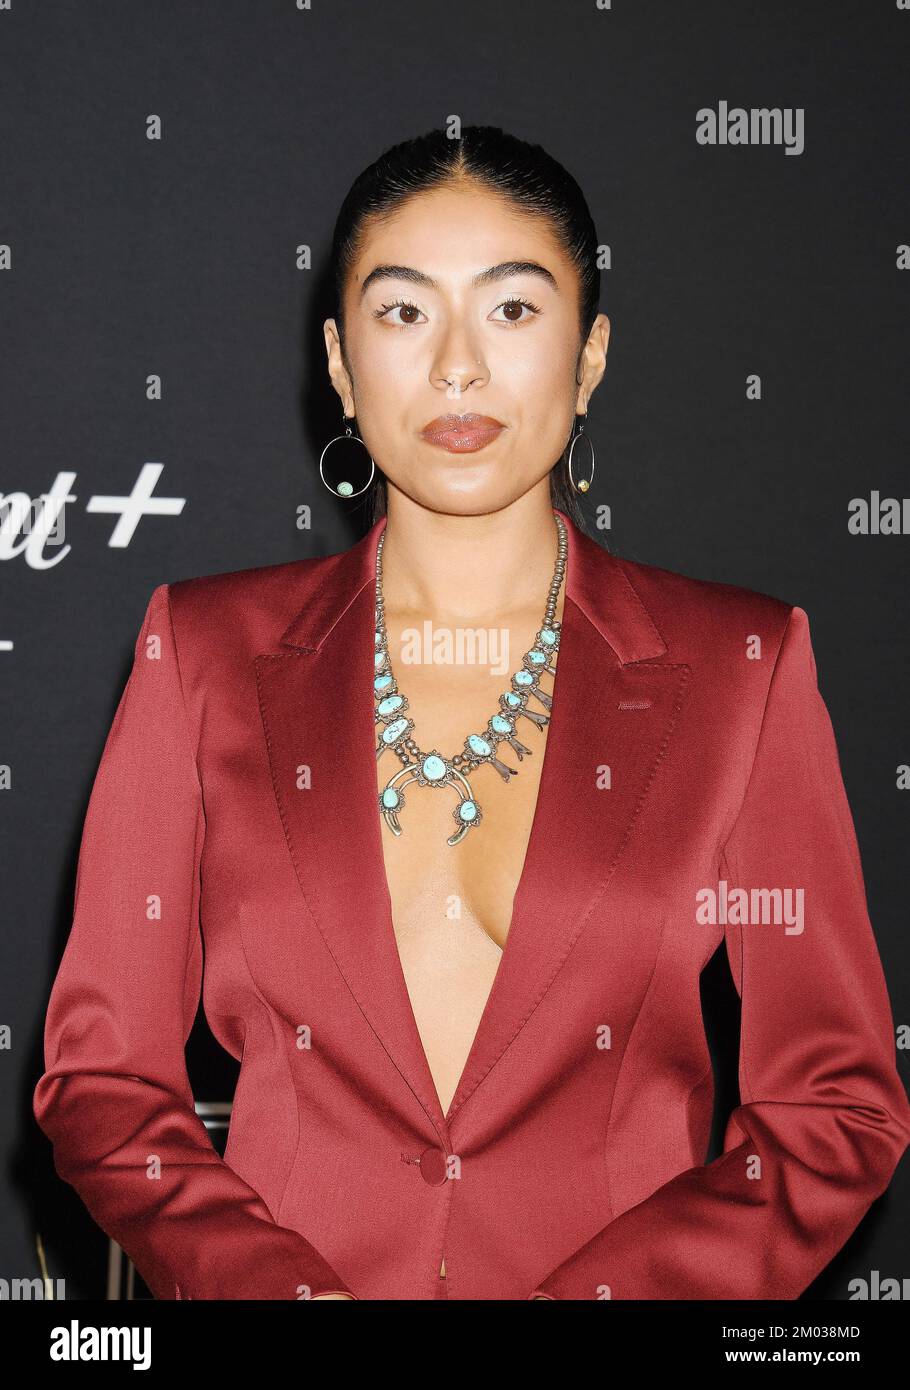 LOS ANGELES, CALIFORNIA - DECEMBER 02: Aminah Nieves attends the Los Angeles Premiere Of Paramount+'s '1923' at Hollywood American Legion on December Stock Photo